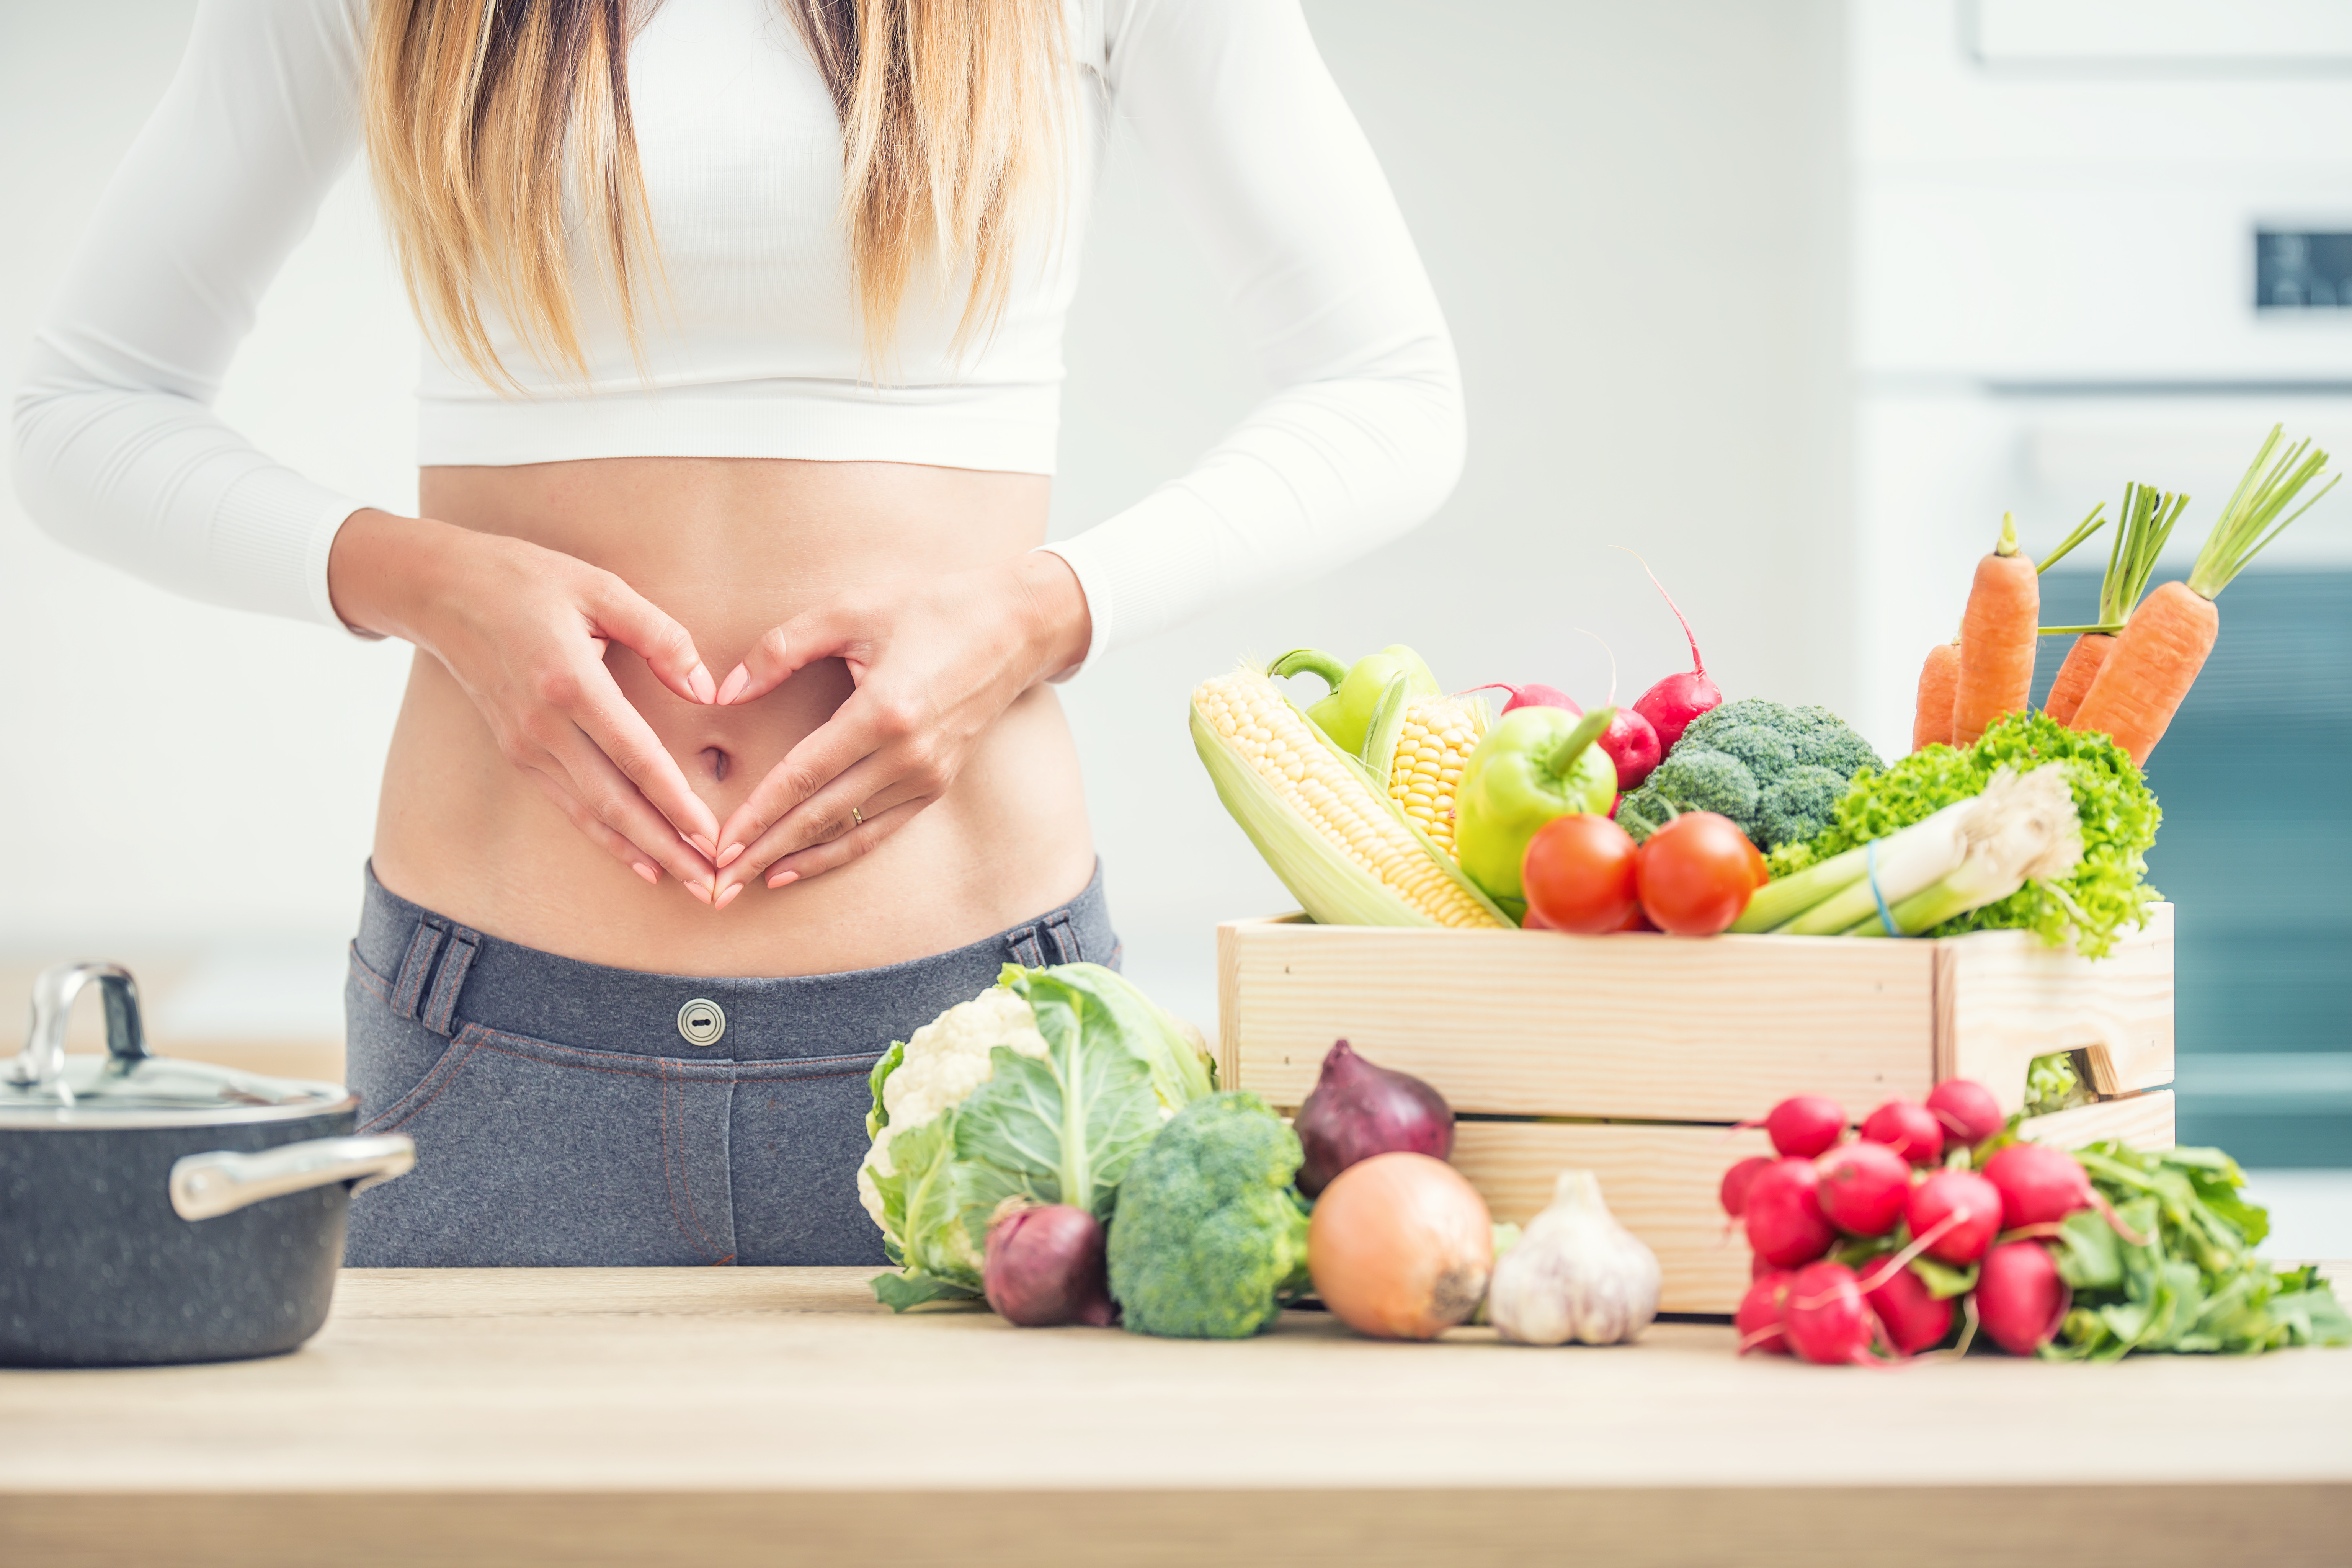 4TOP BENEFITS OF SEEING A NUTRITIONIST